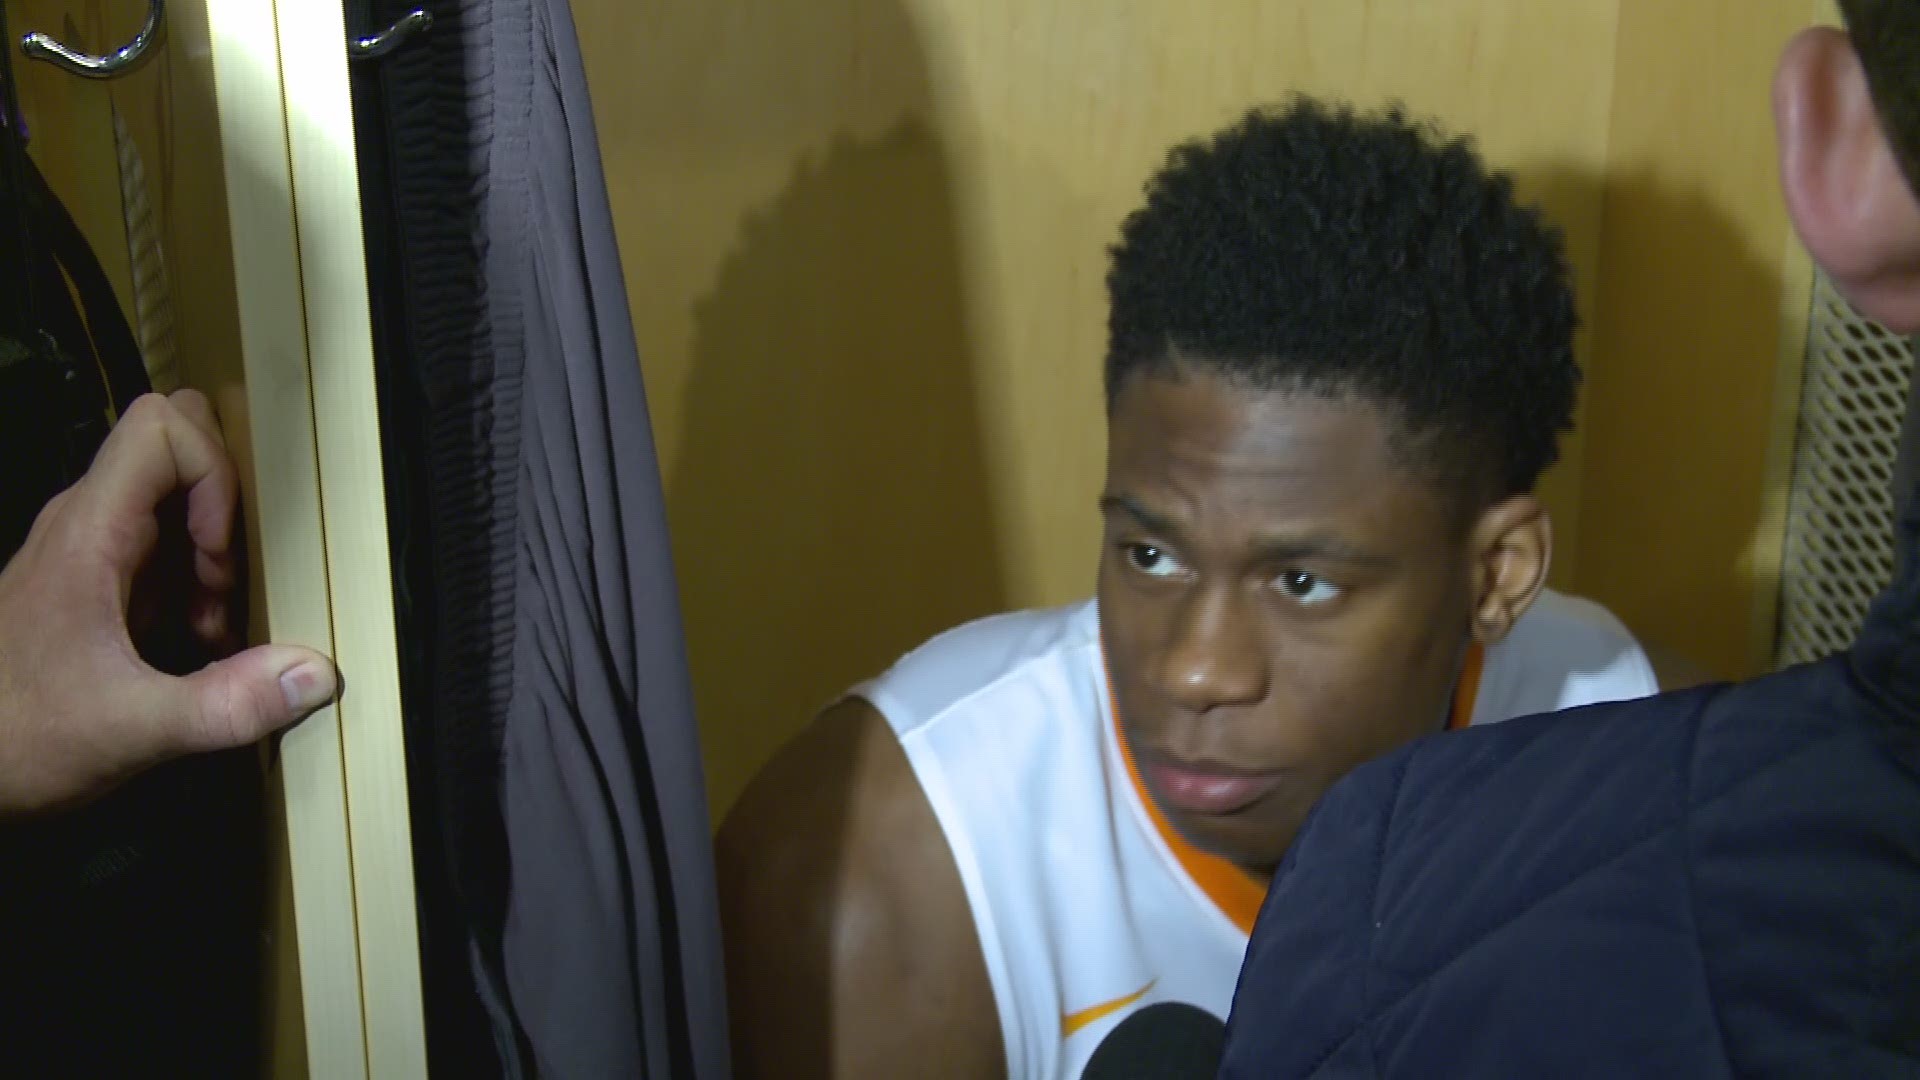 Admiral Schofield scored 15 points and grabbed 12 rebounds in Tennessee's first round NCAA Tournament win over Wright State.